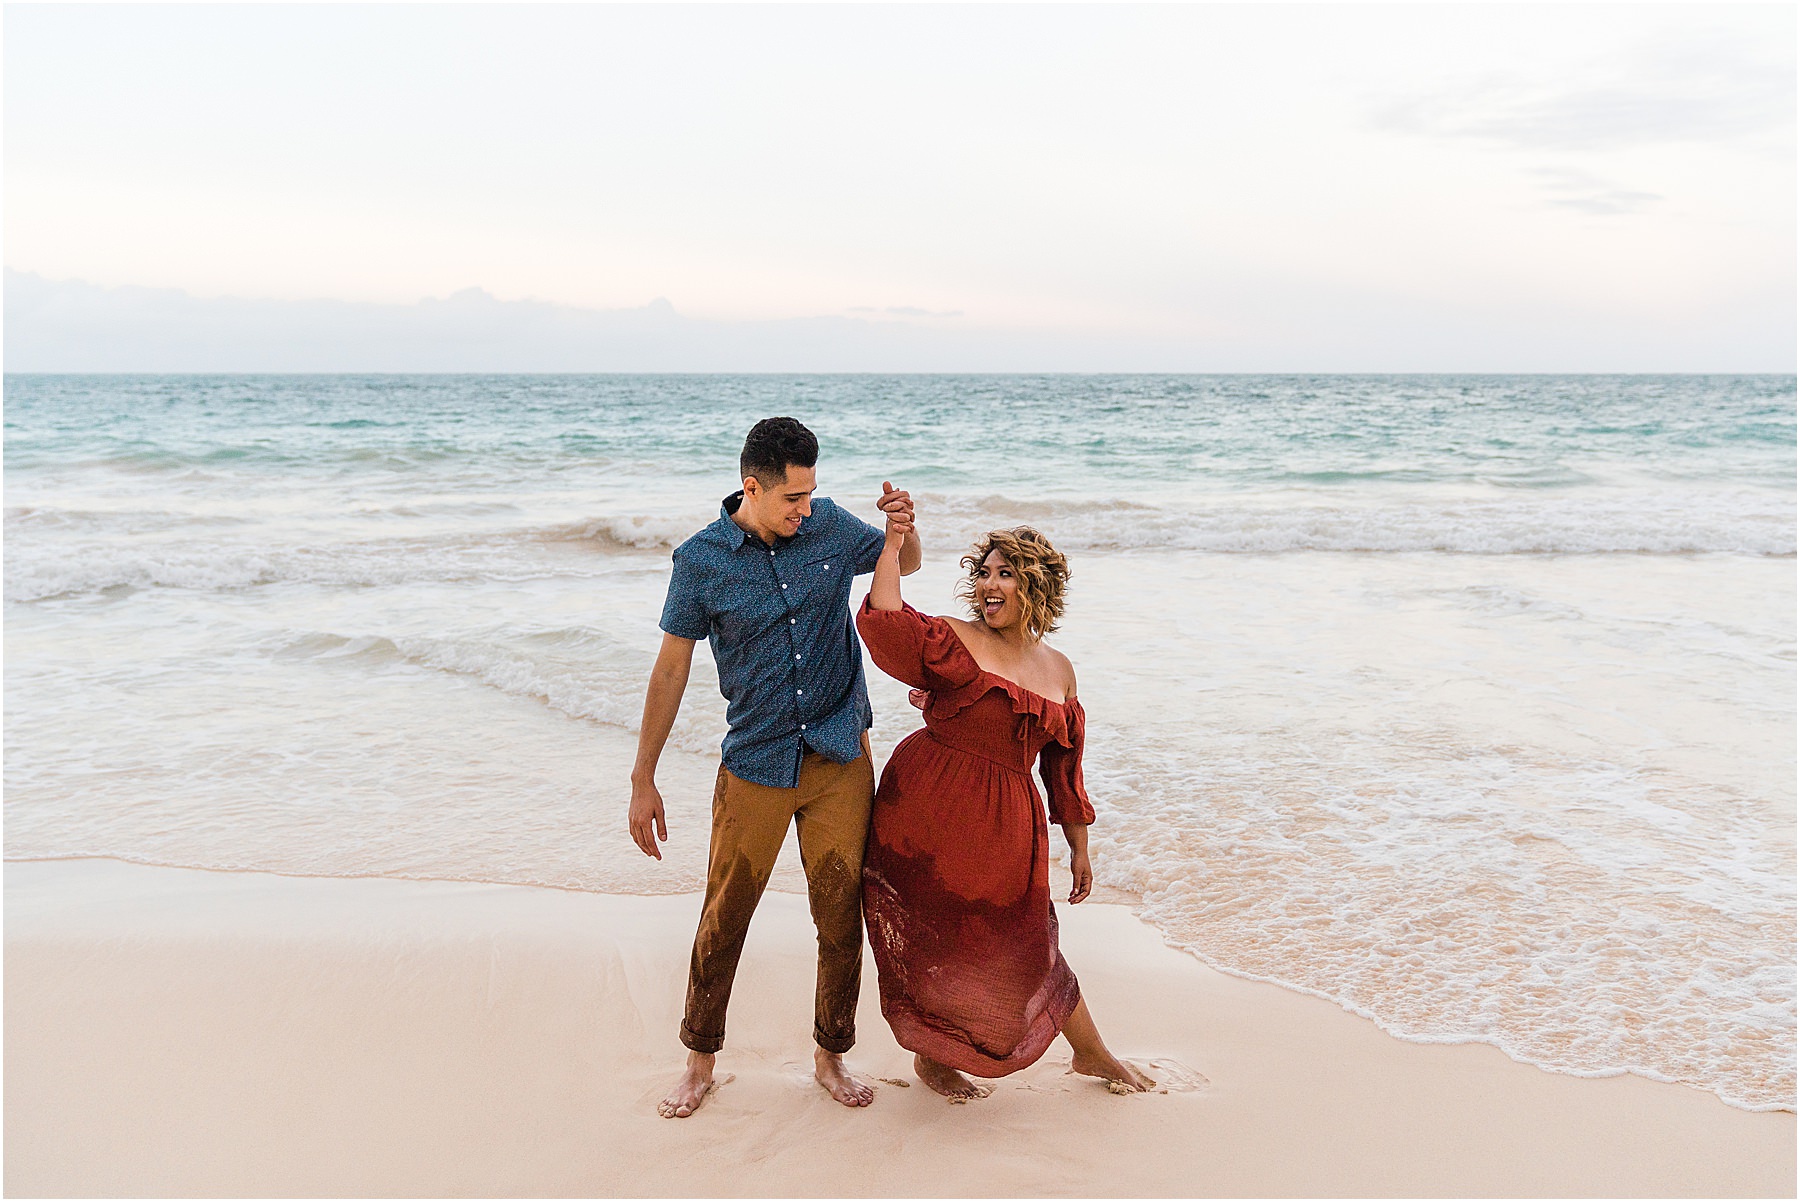 playful couple having fun on beach for anniversary photo session